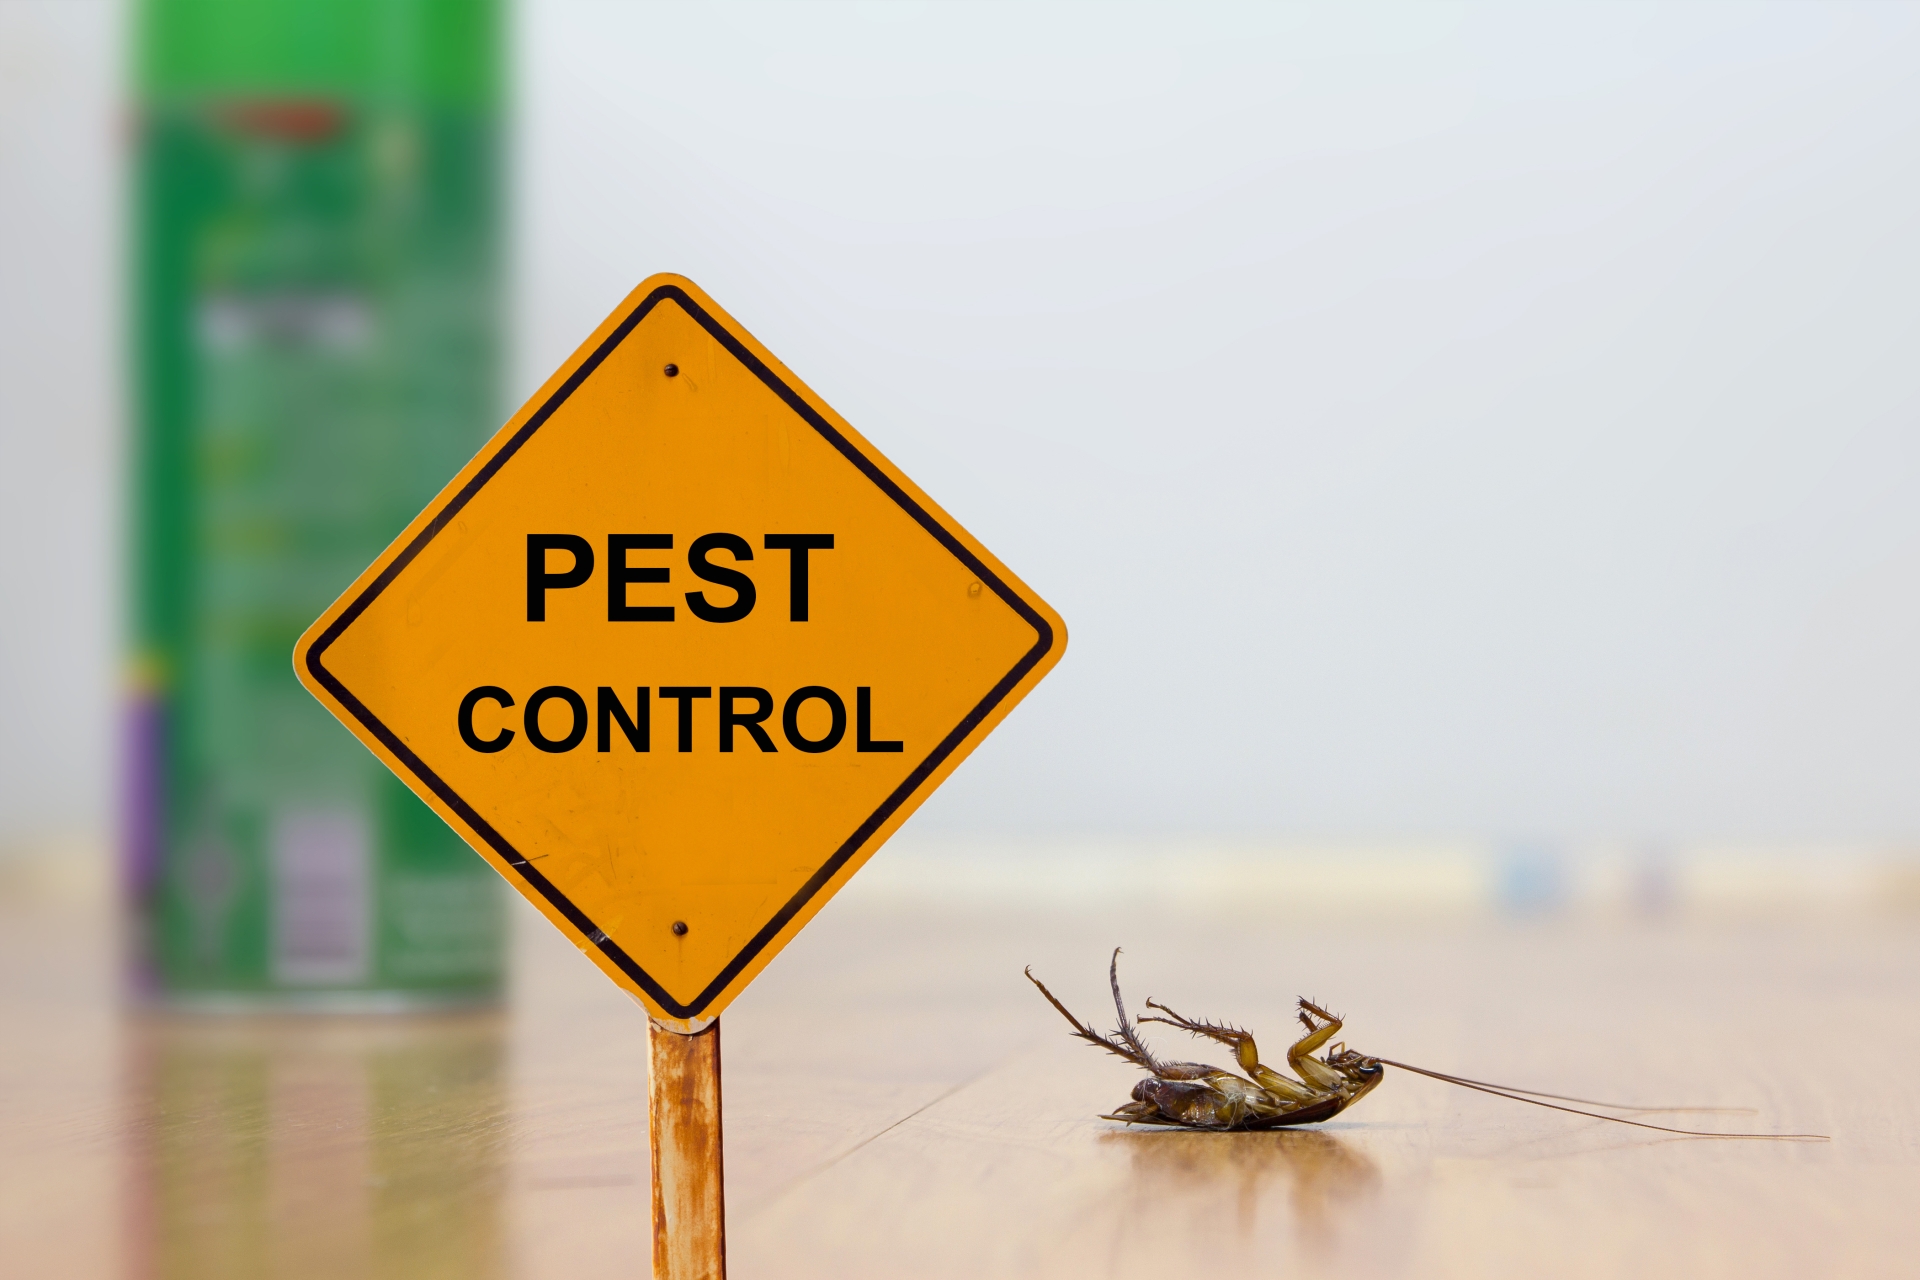 24 Hour Pest Control, Pest Control in Ealing, W5. Call Now 020 8166 9746